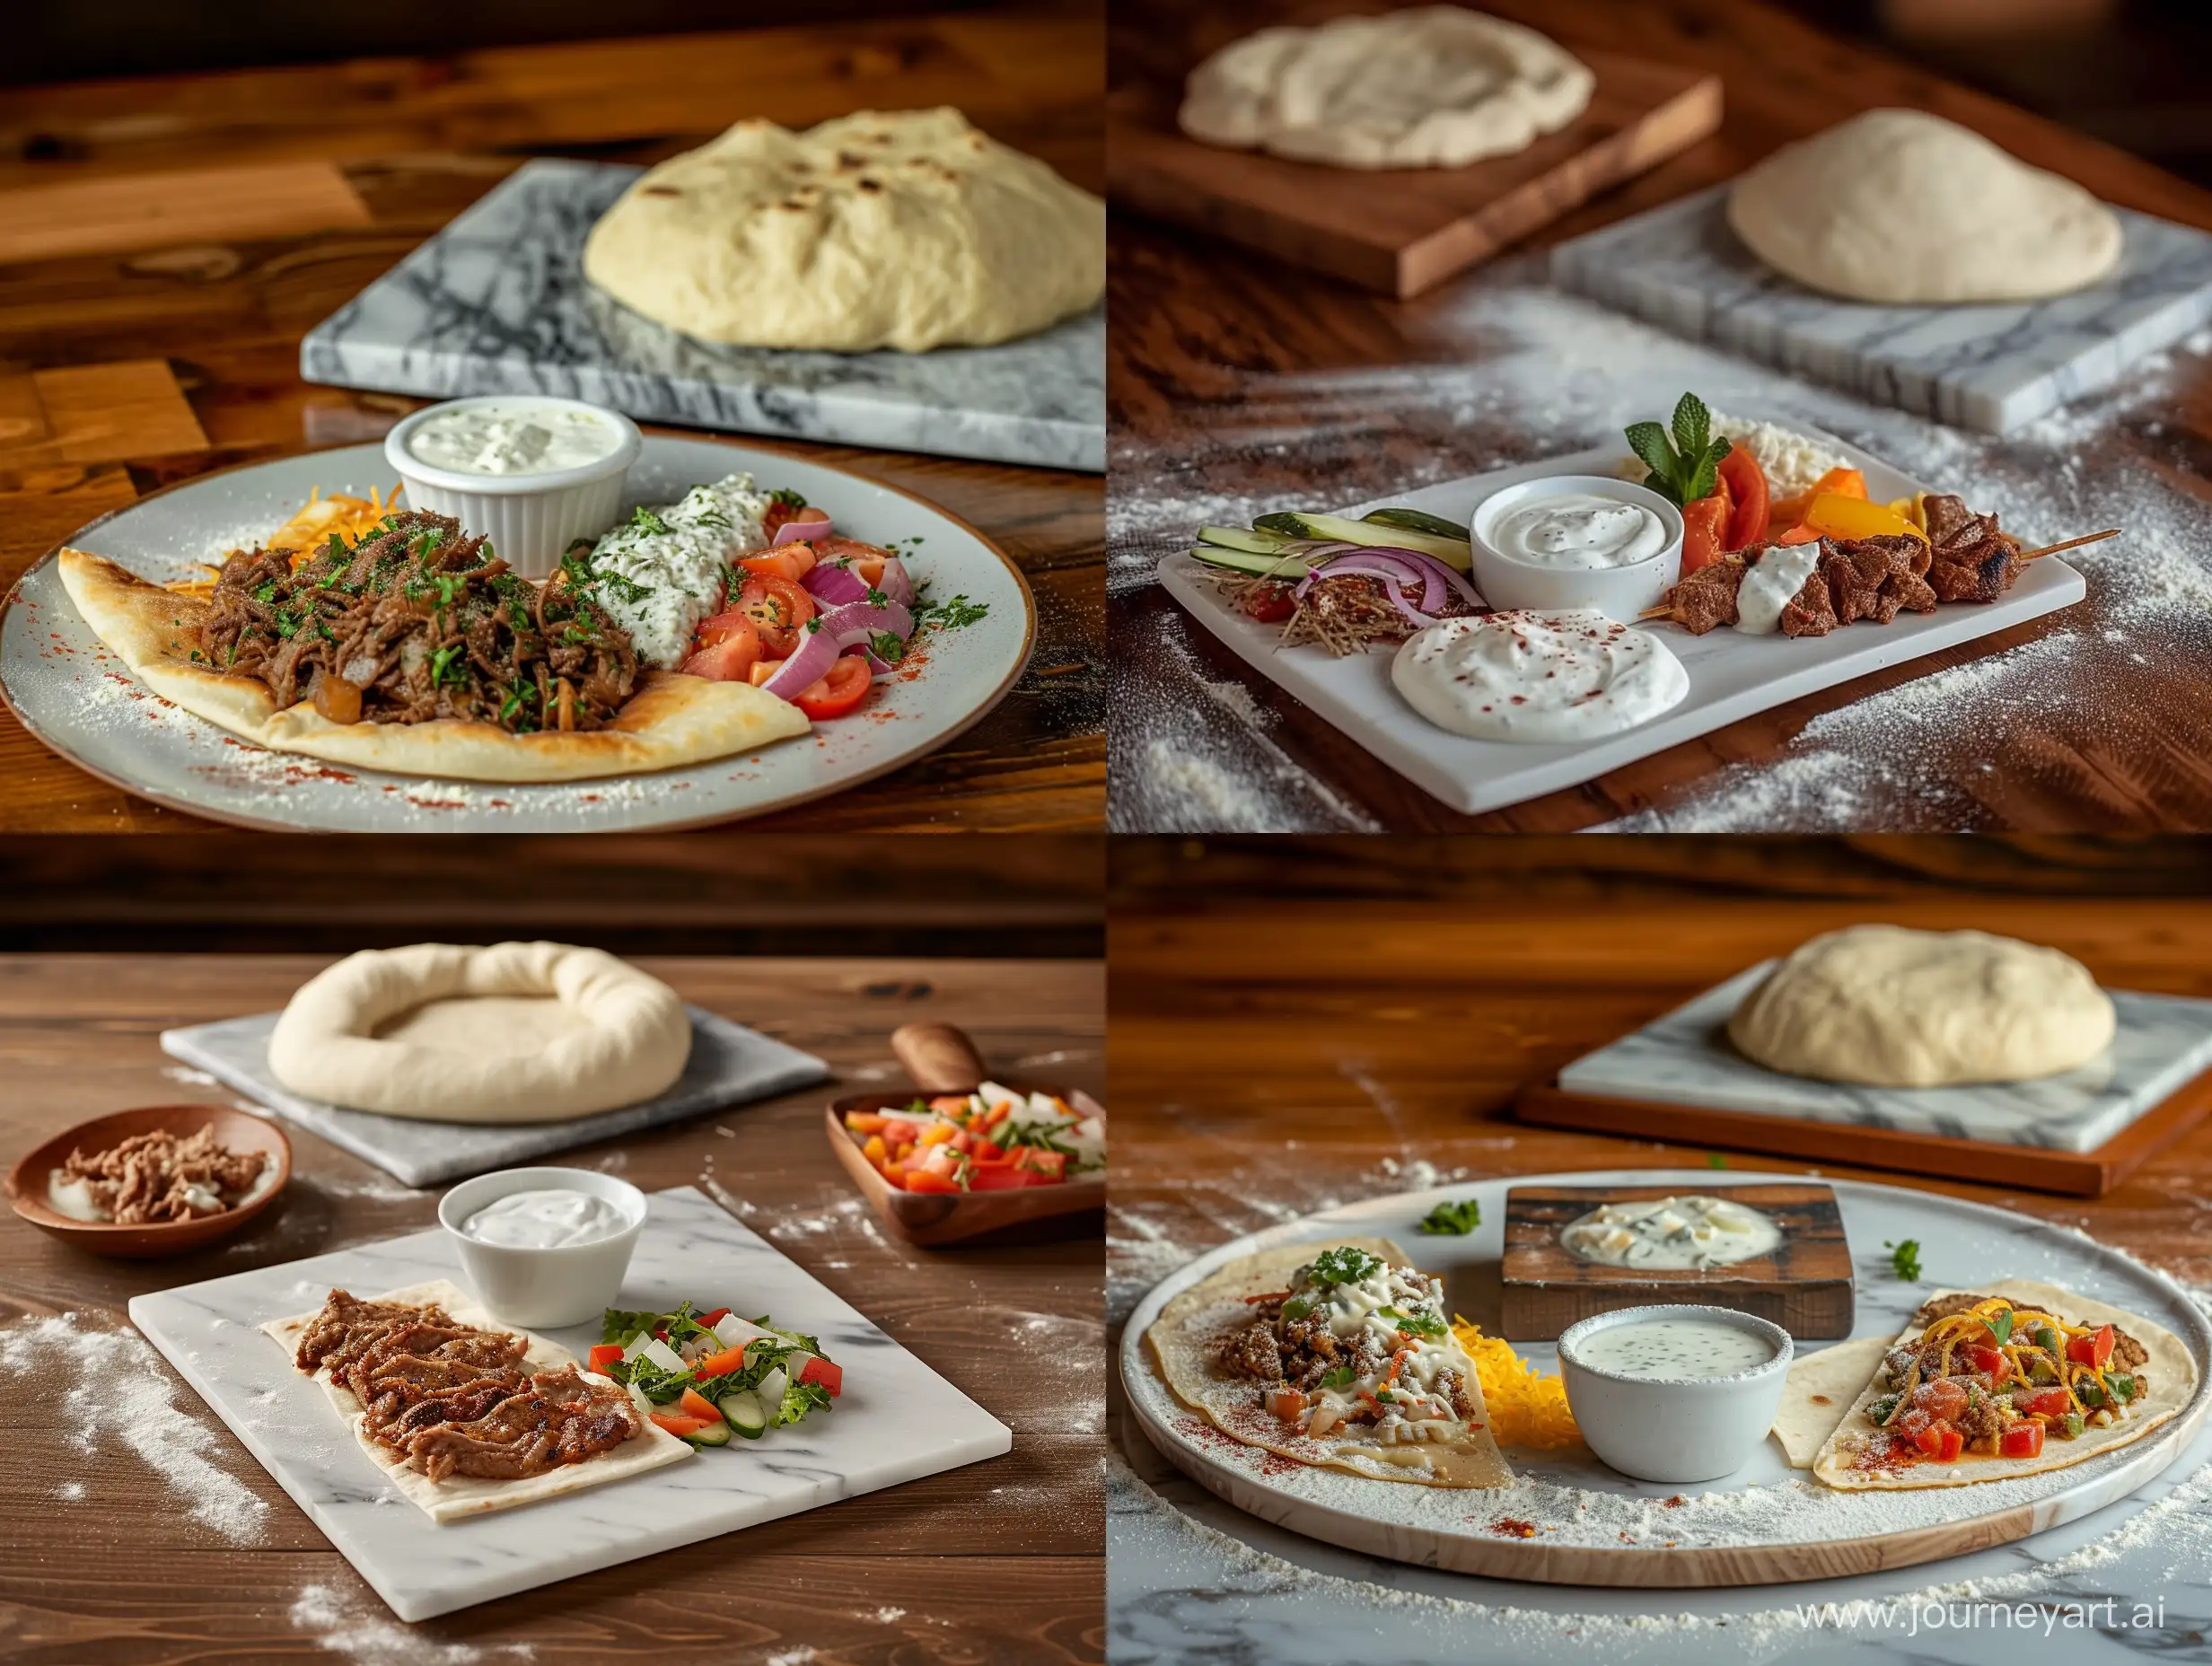 Delicious-Gyros-Platter-with-Fresh-Ingredients-on-Wooden-Table